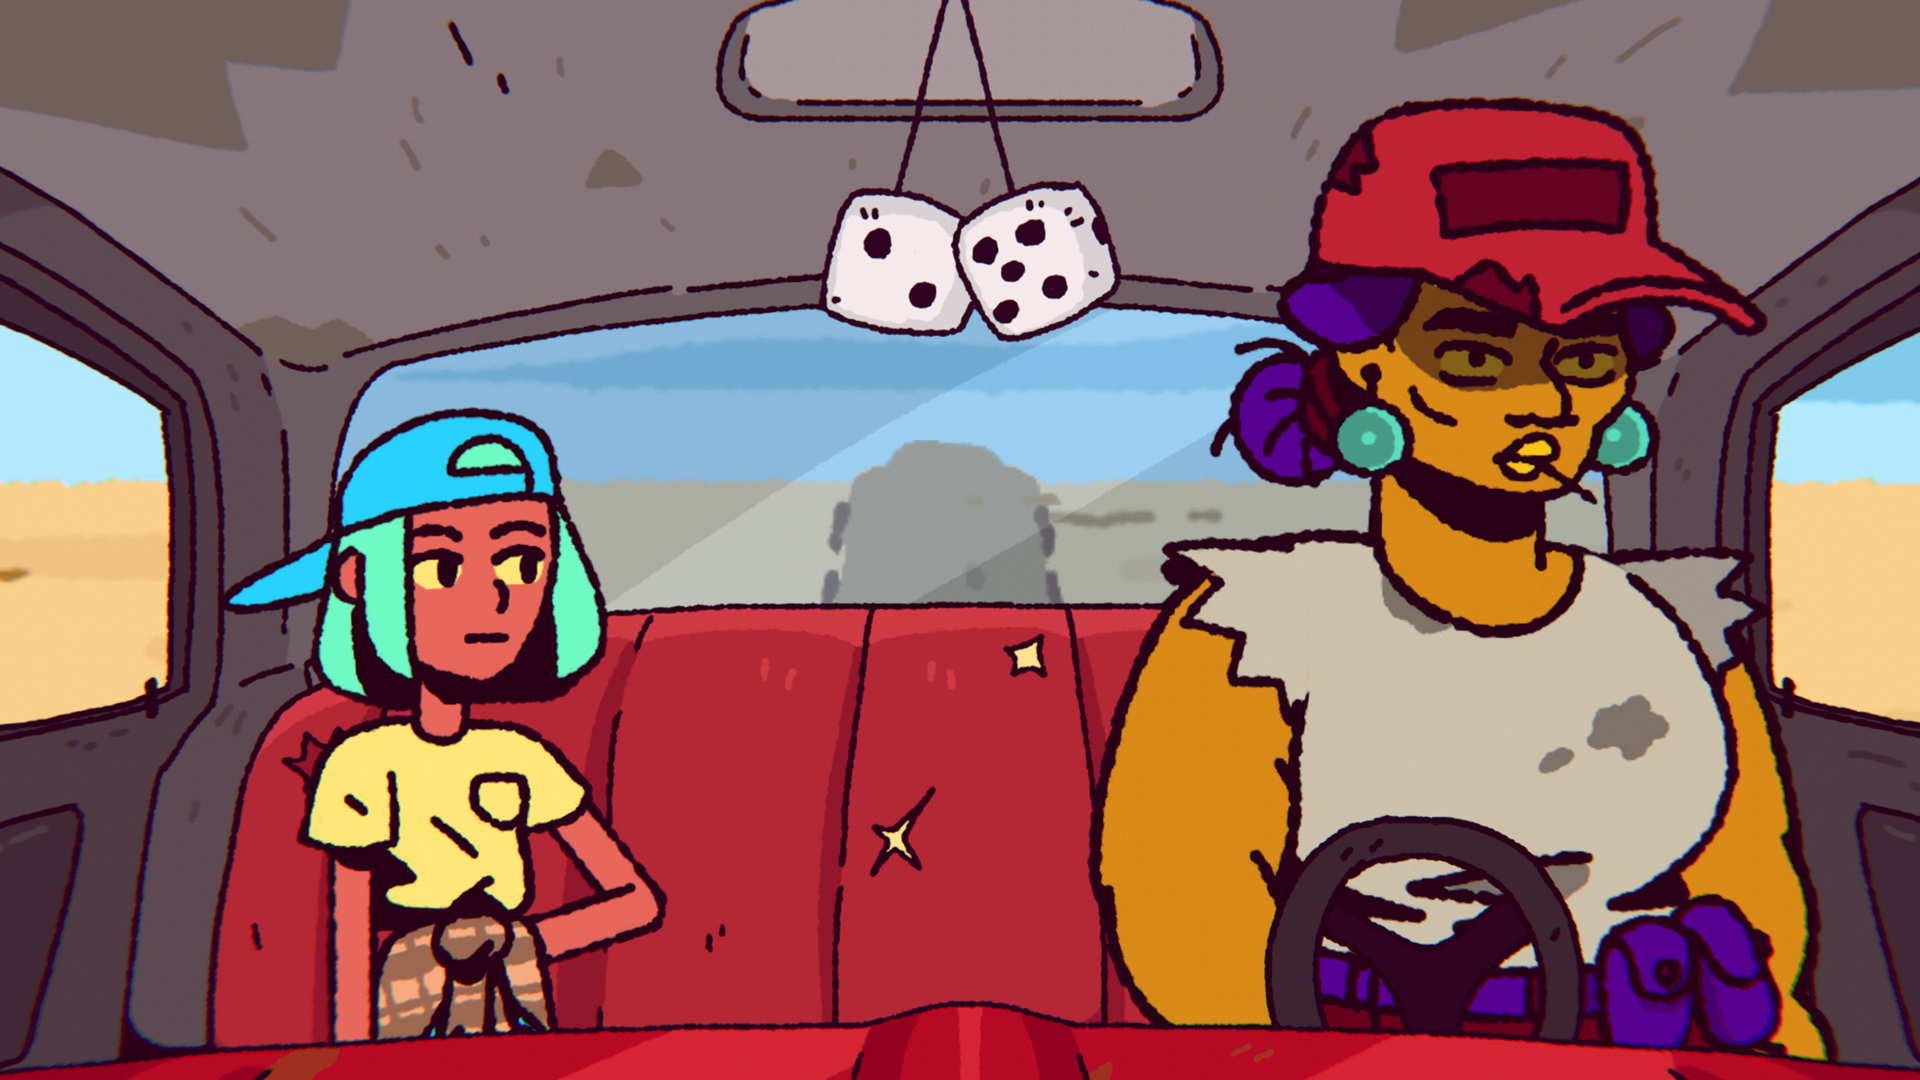 Ali sitting in a truck with an older woman wearing a trucker hat, with fuzzy dice in the window.